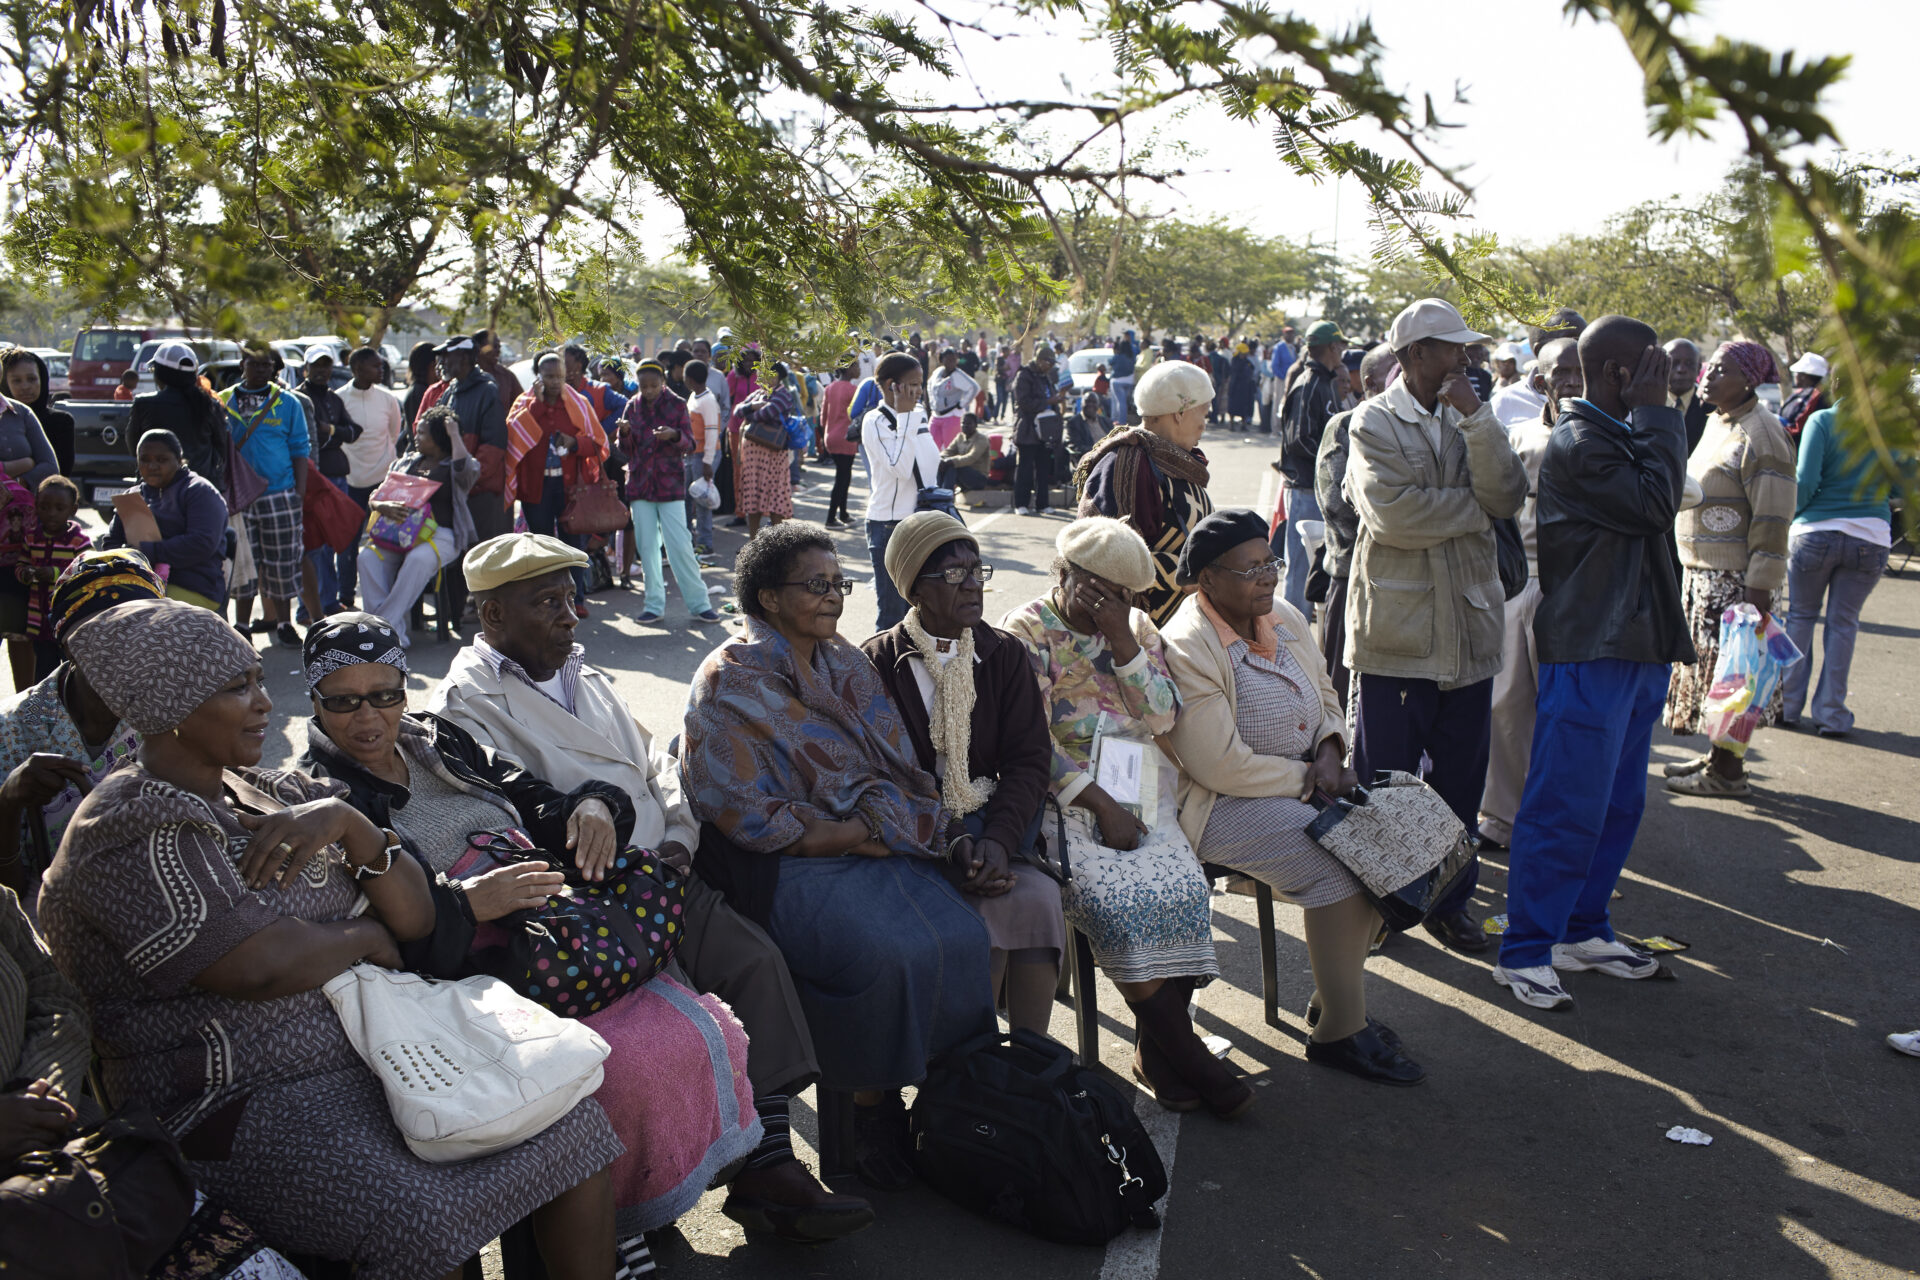 south-africa-needs-to-make-pension-system-more-inclusive-study-says